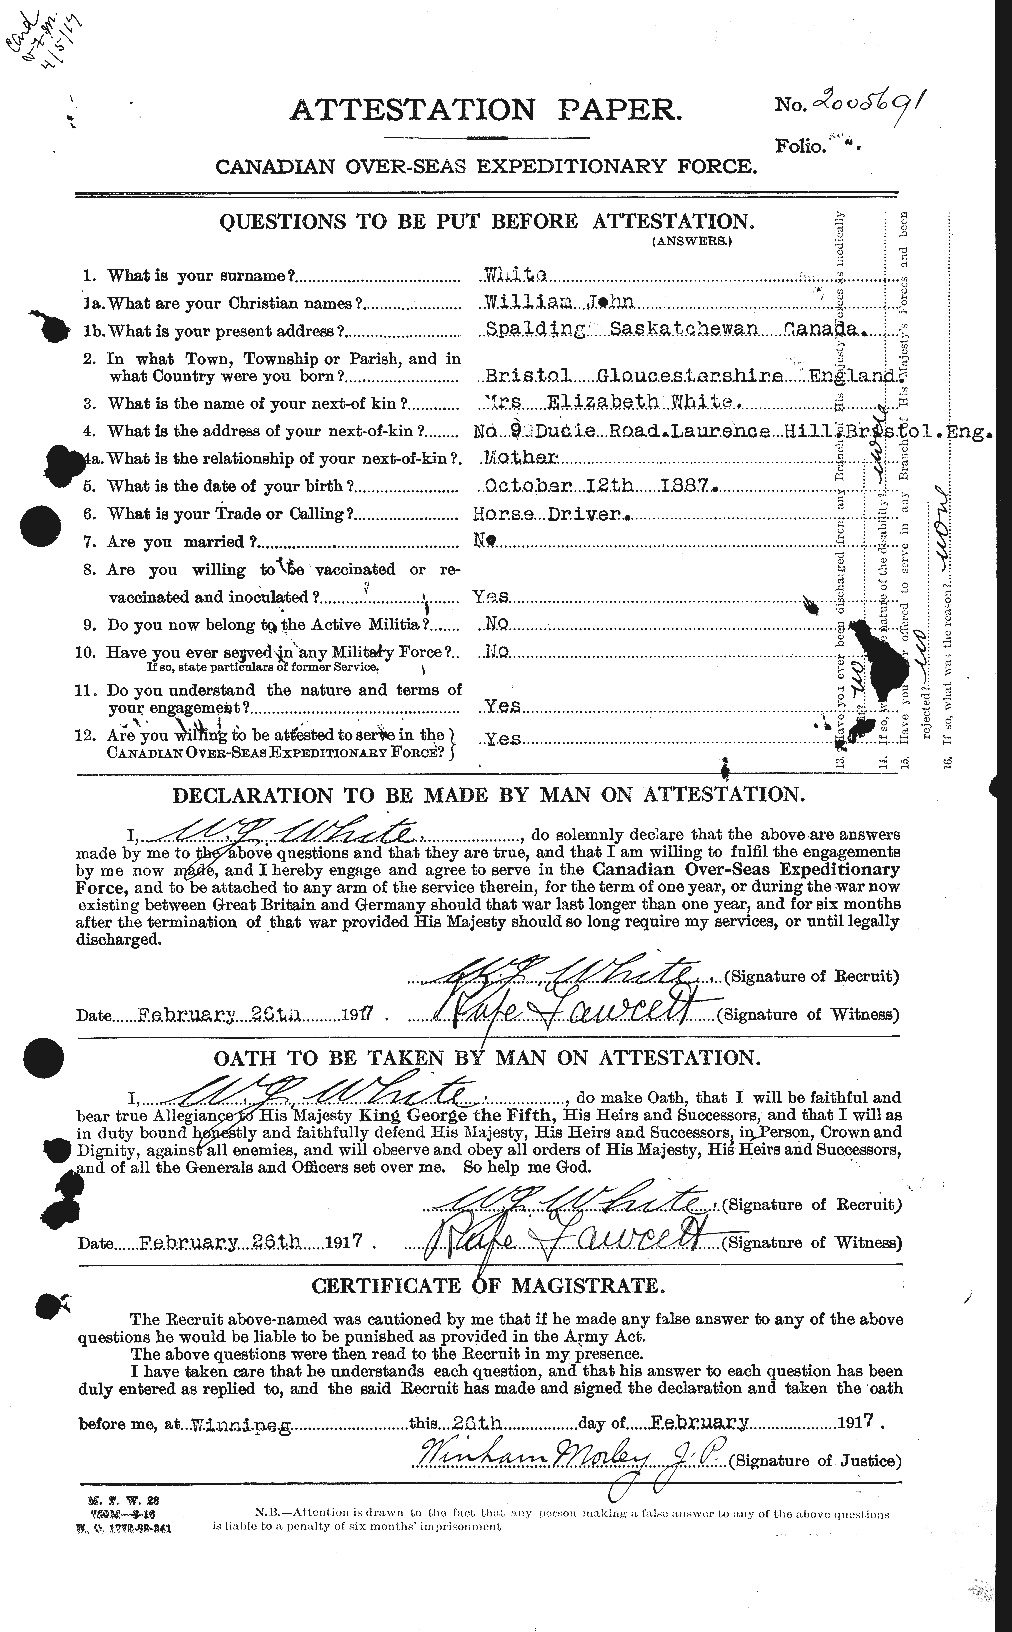 Personnel Records of the First World War - CEF 669049a